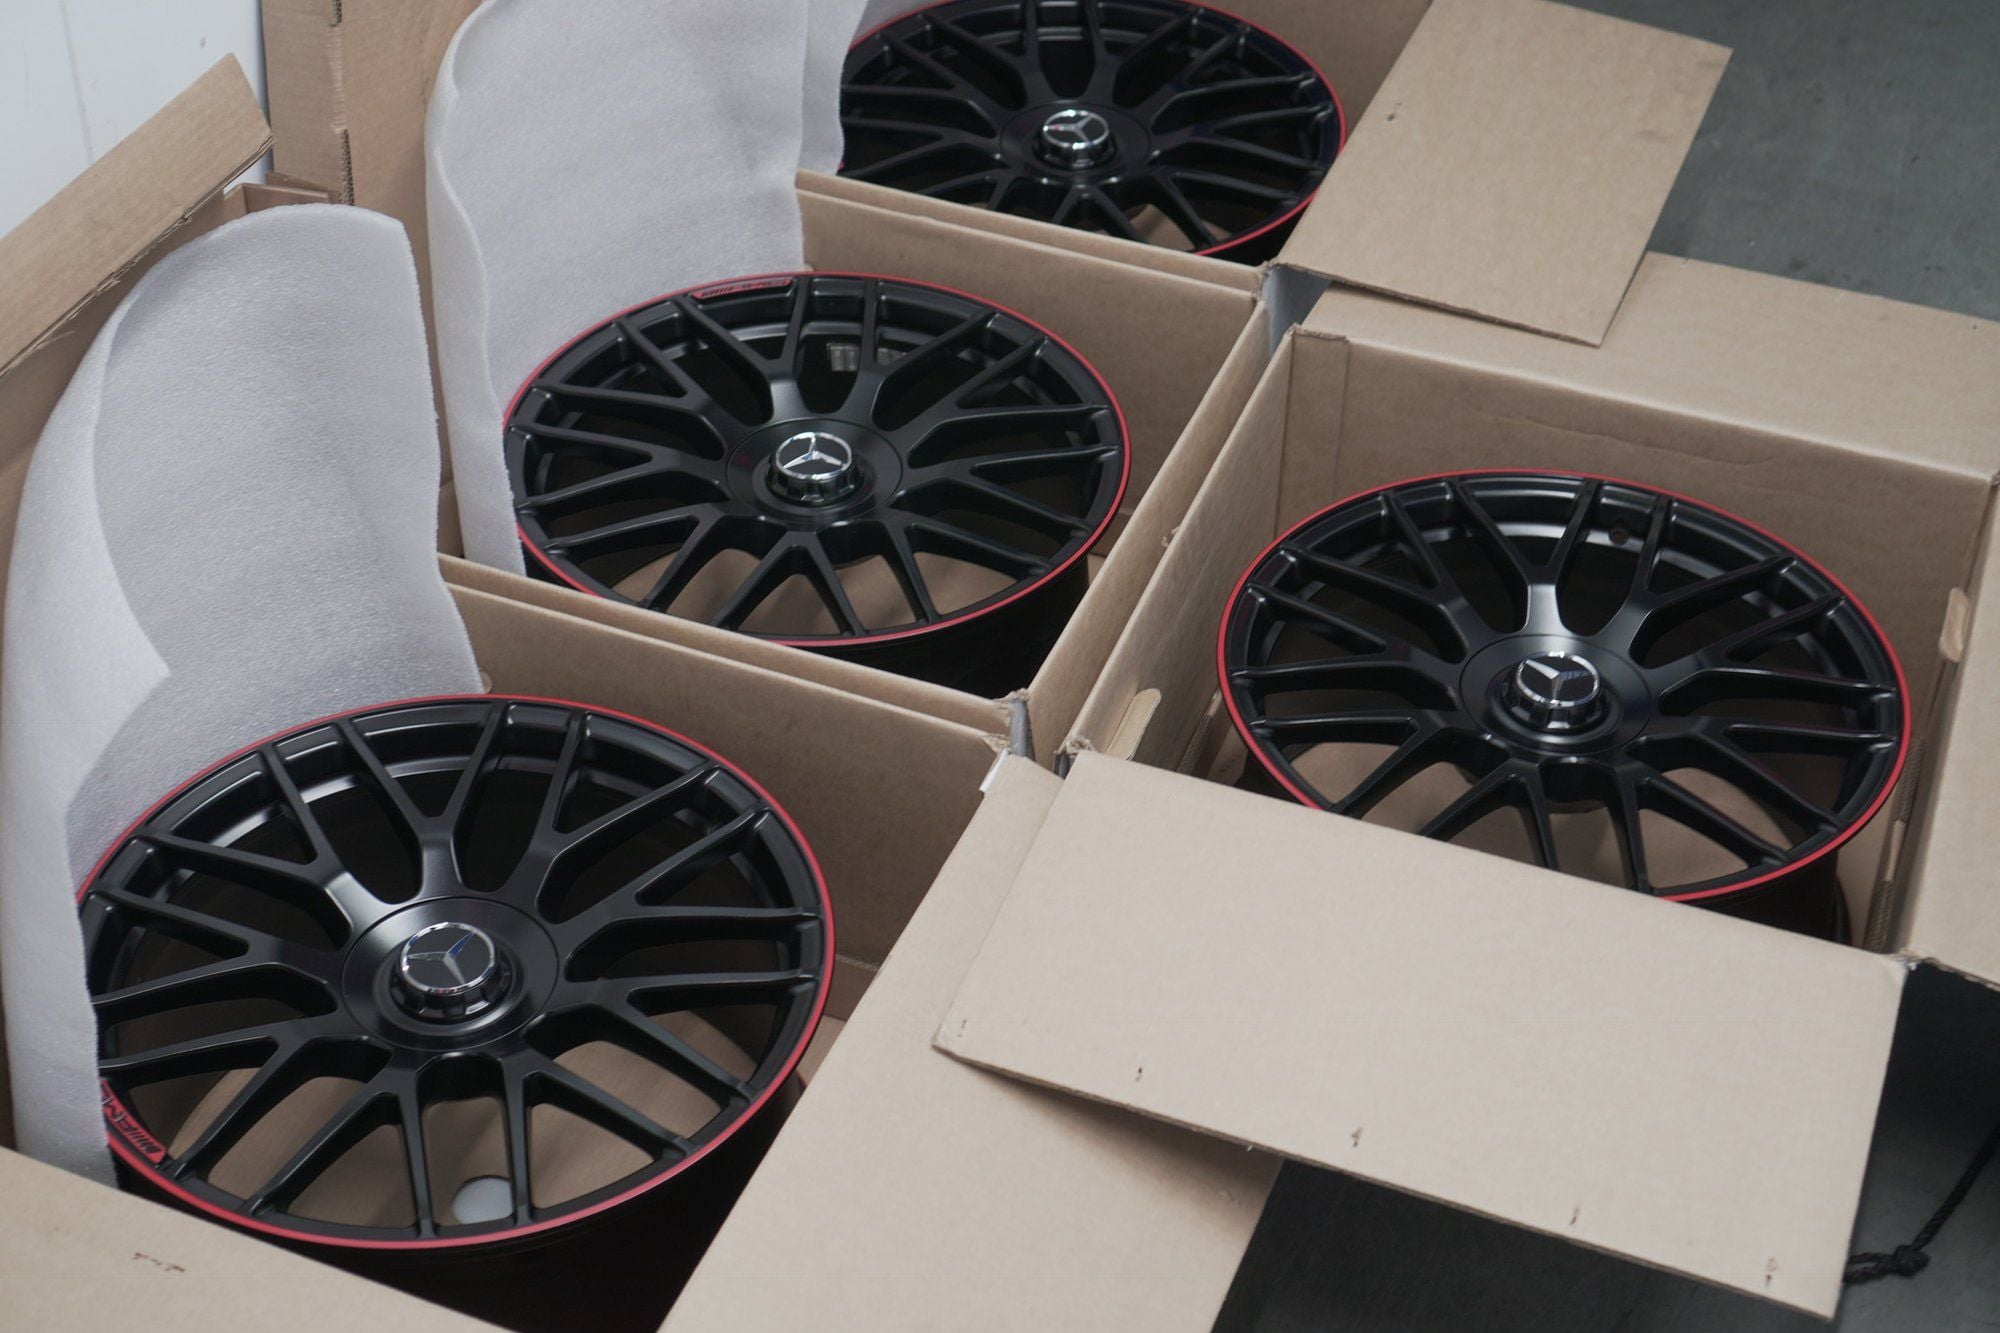 Wheels and Tires/Axles - [WTB] Looking to buy OEM cross spoke rim for W205 C63s Sedan - New or Used - 2016 to 2019 Mercedes-Benz C63 AMG S - San Francisco, CA 94100, United States